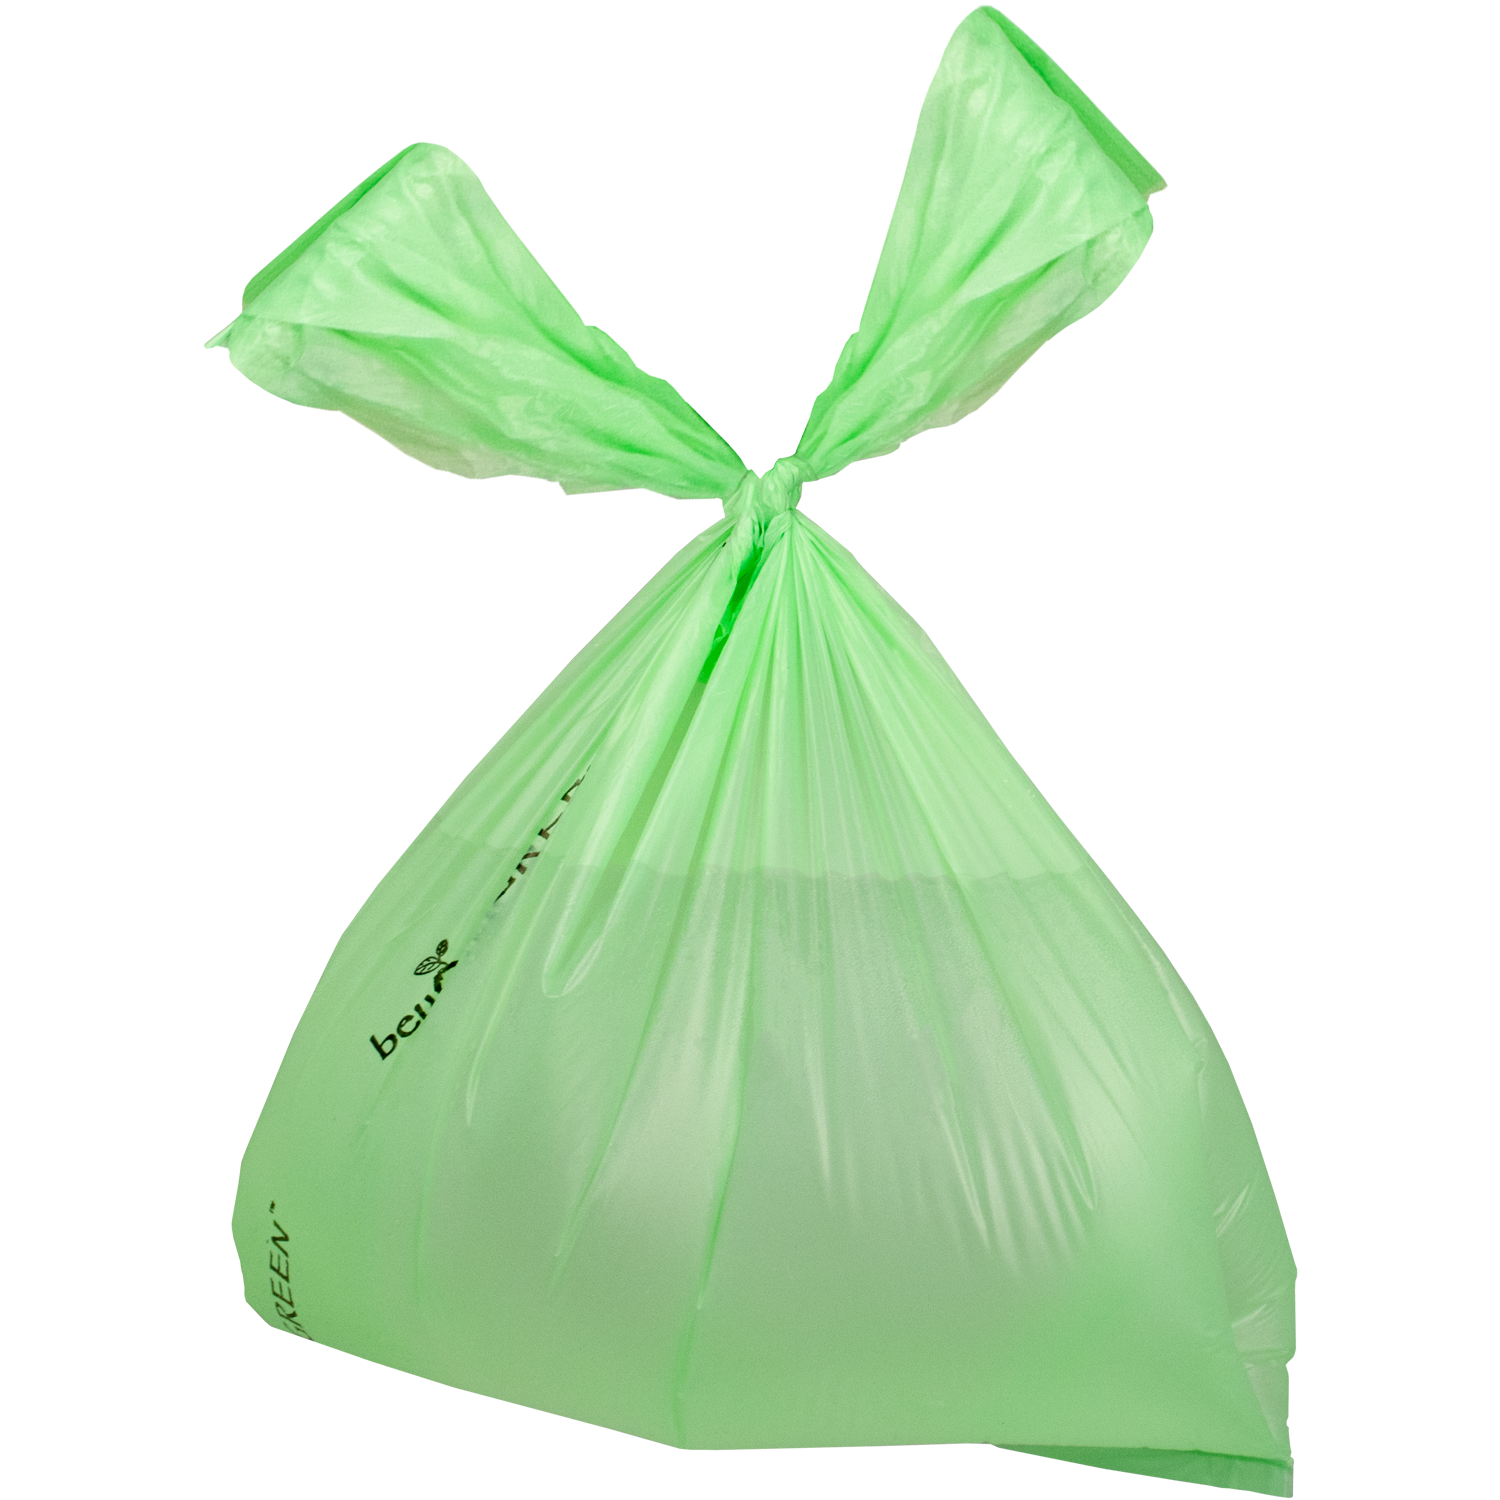 Regular Plant-Based Cat Litter Pick-Up Bags with Handles - 300 Bags